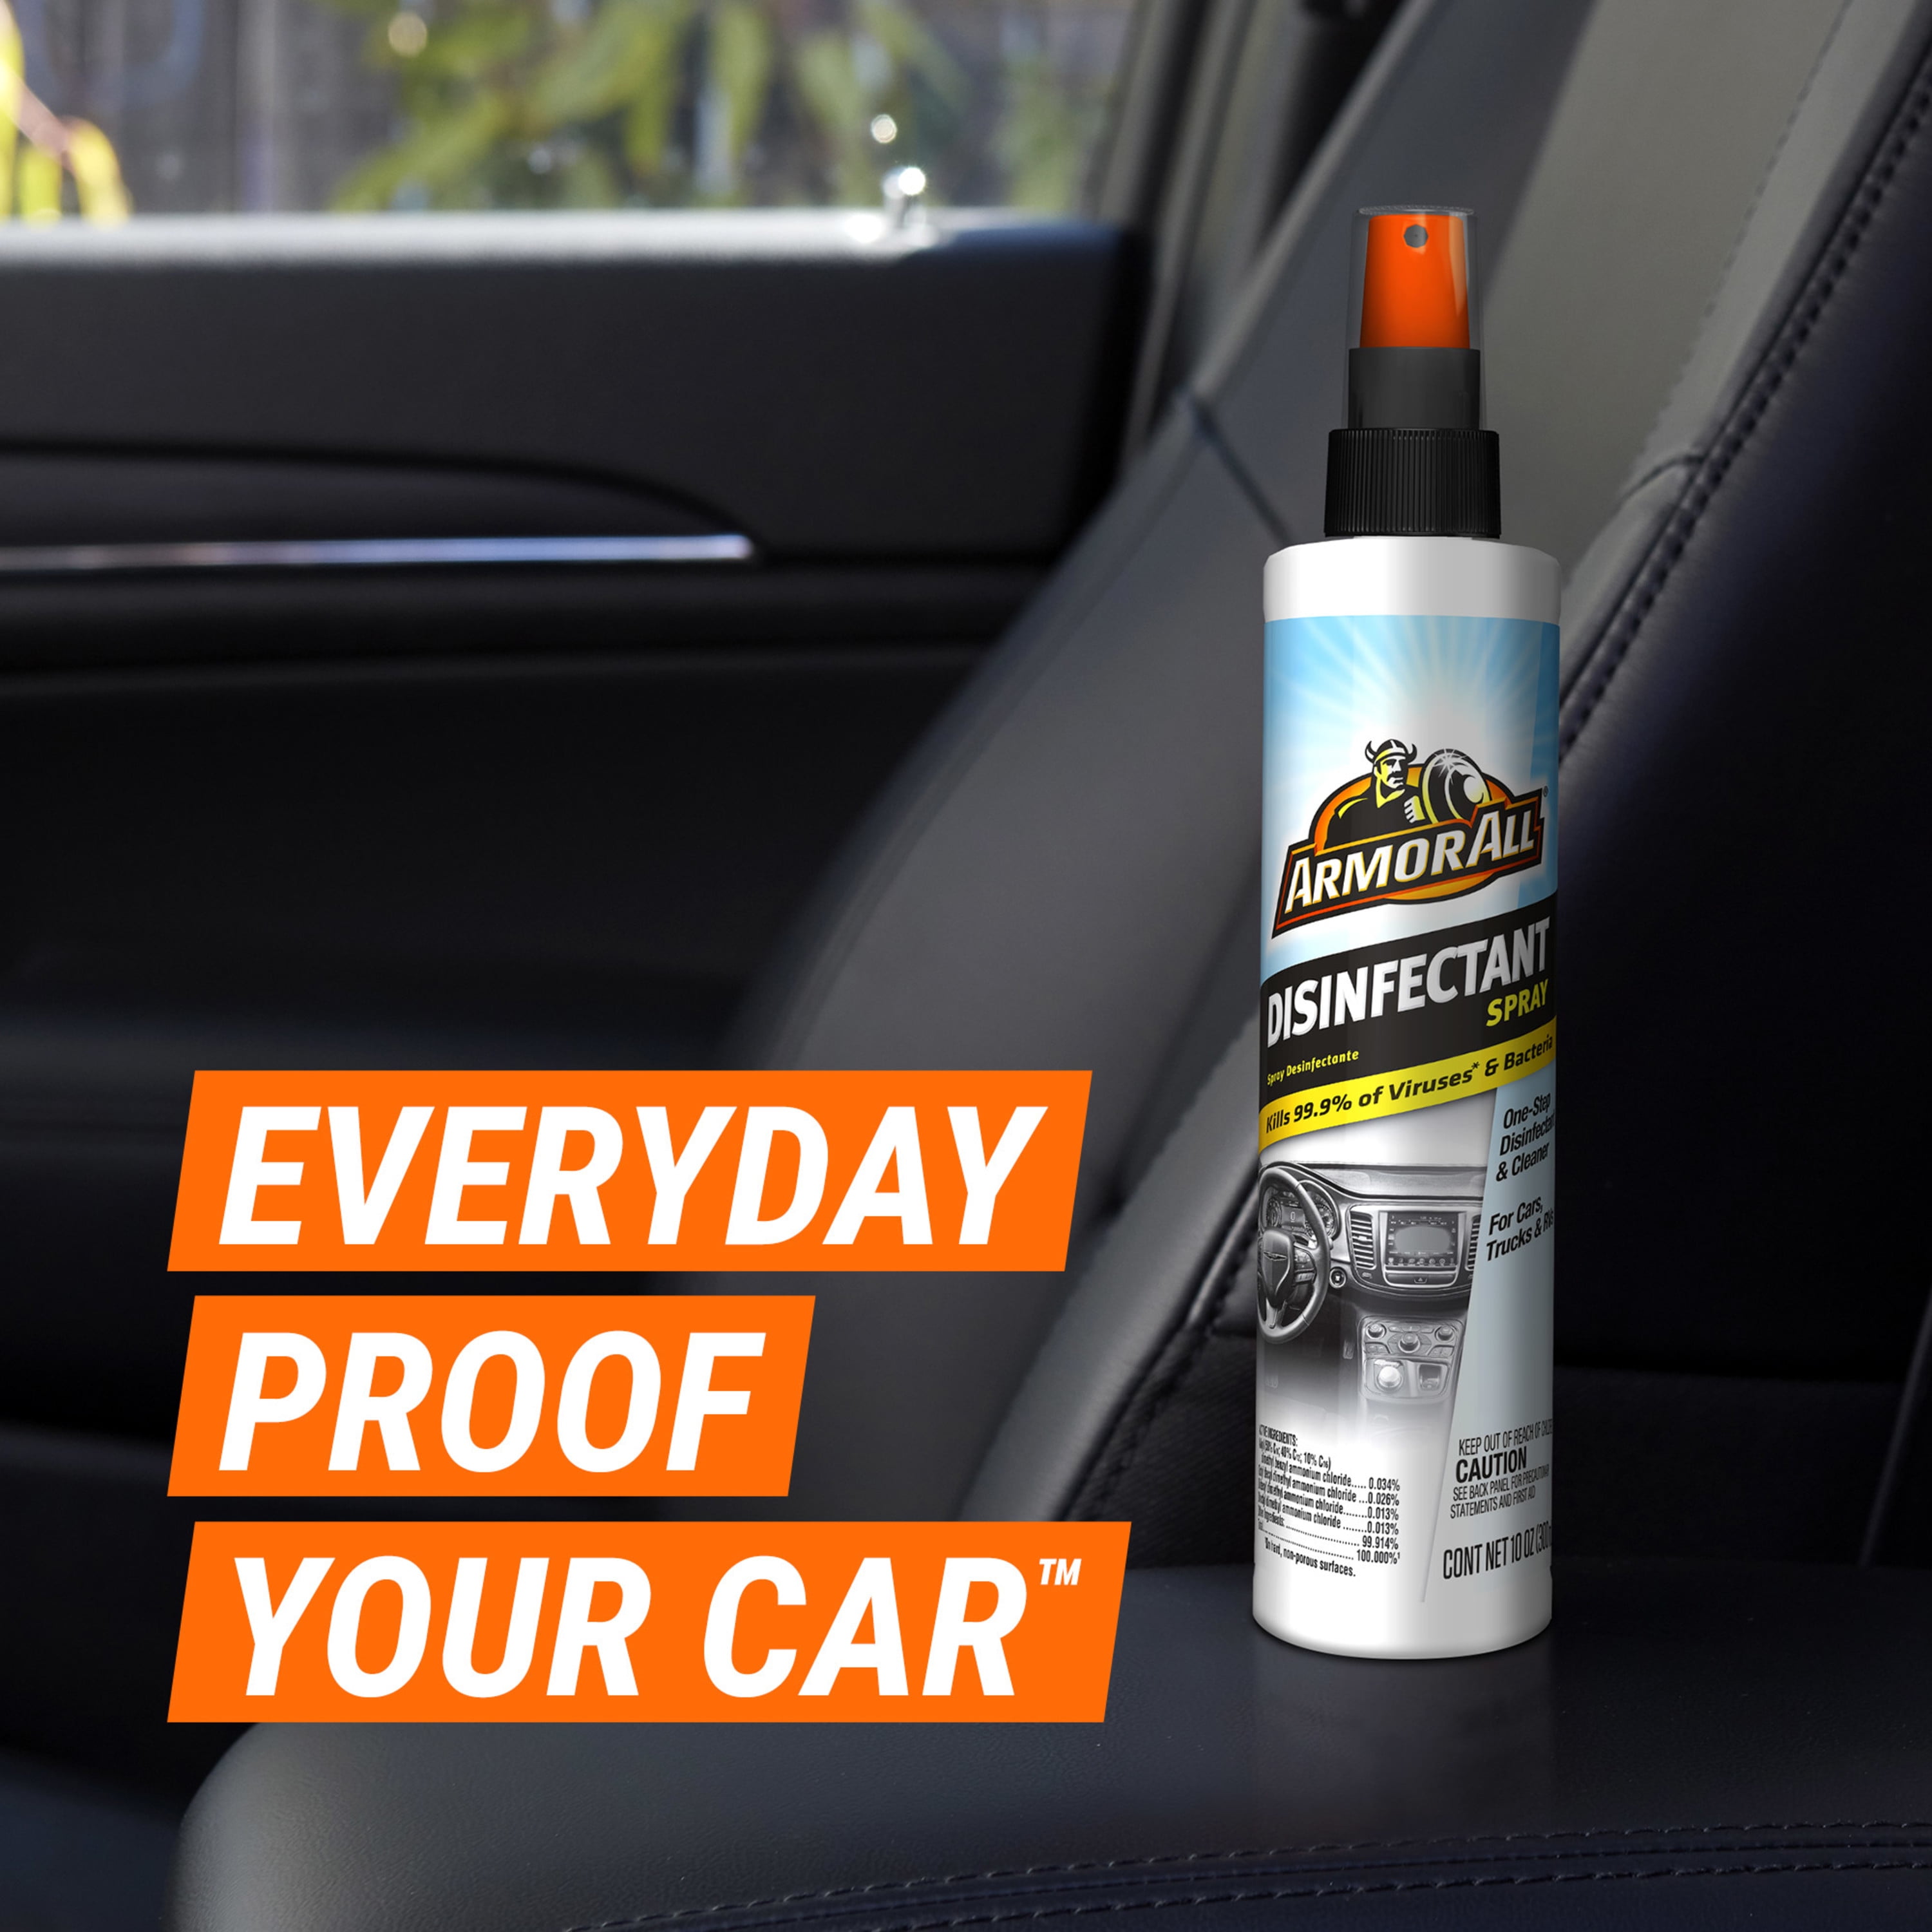 Armor All - Everyday proof your car